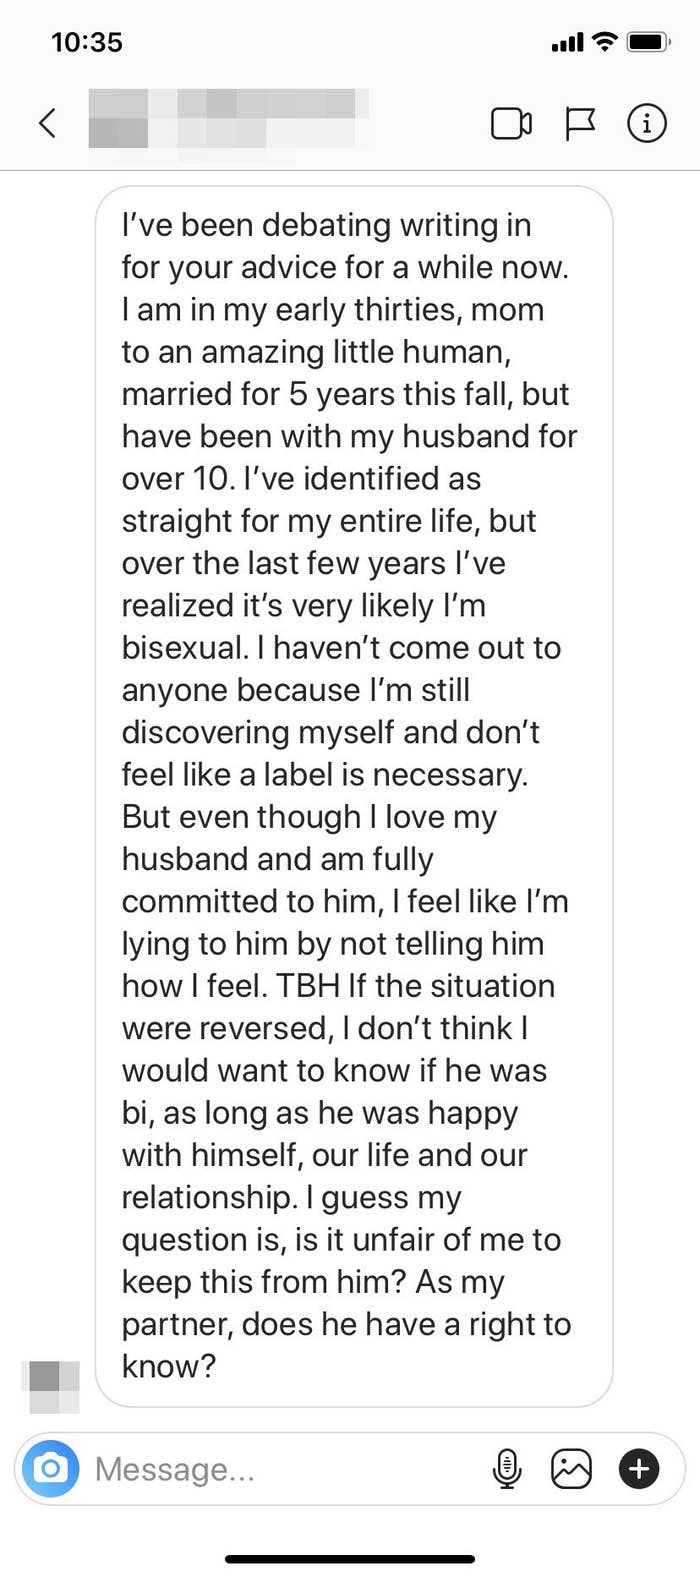 A screenshot of a DM from a woman who has been with her husband for 10 years, married for 5. She thinks she might be bisexual, and wants to know whether her husband has a right to know about this.